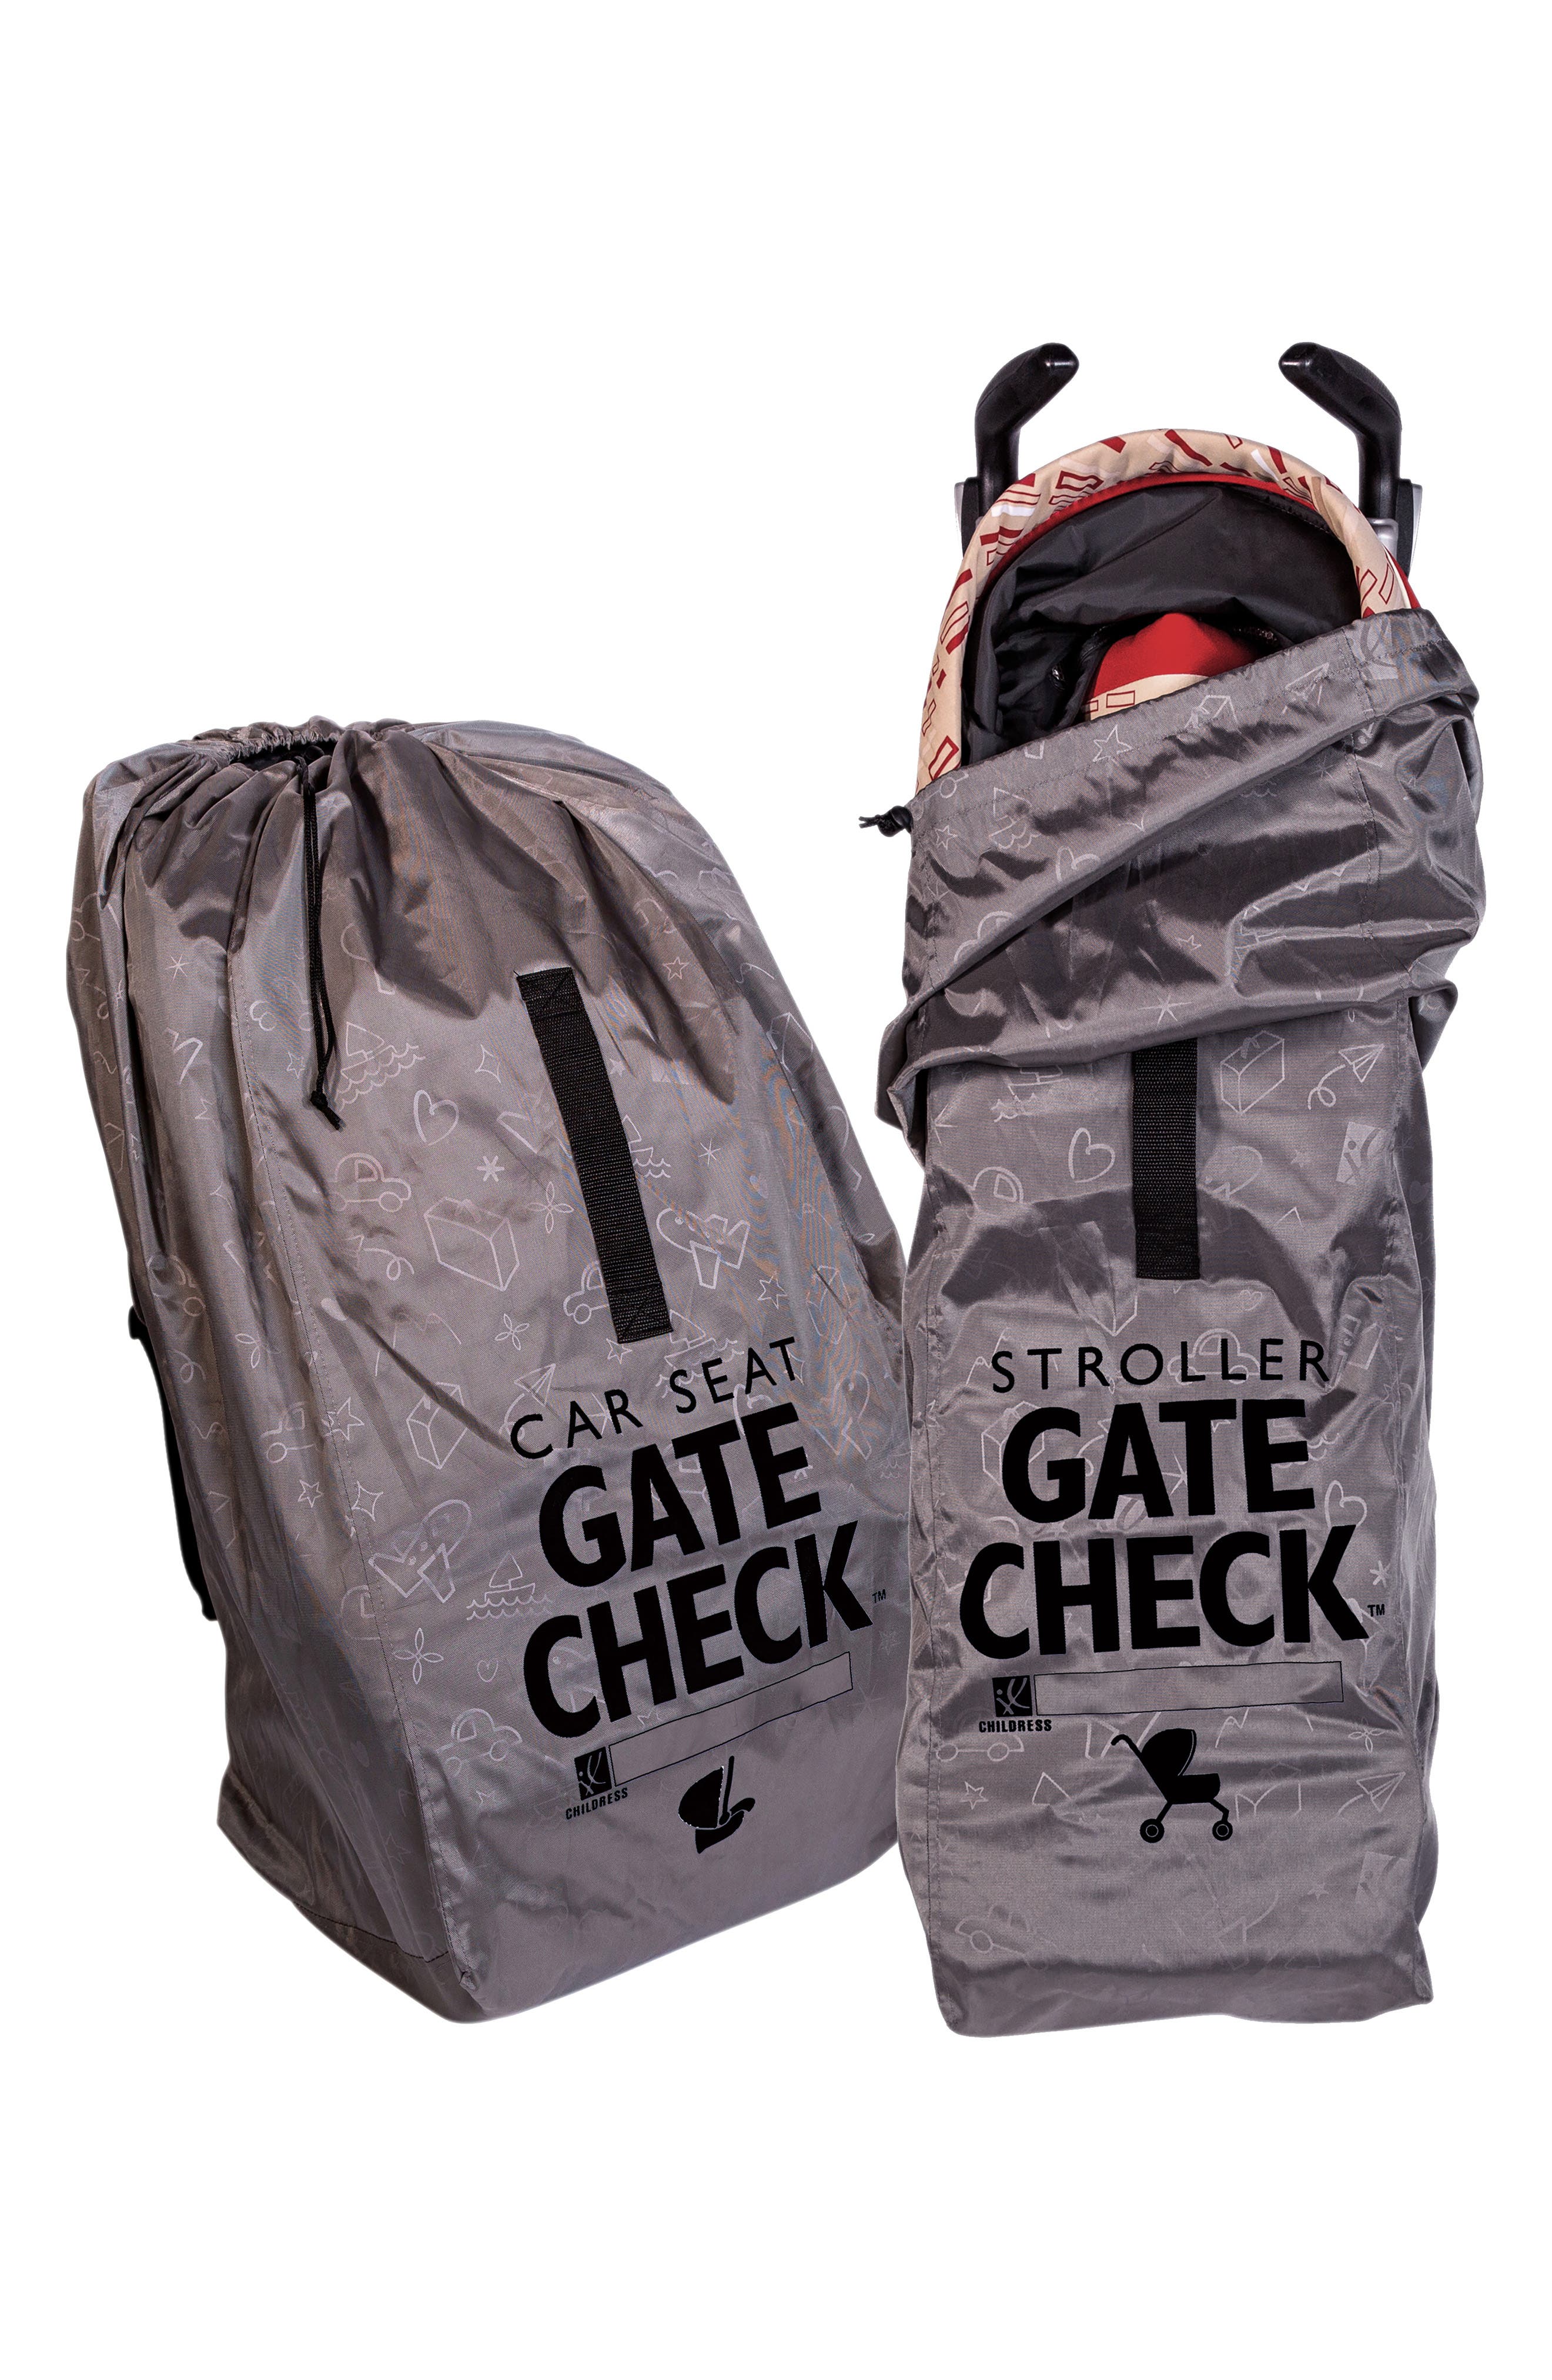 gate checking car seat and stroller